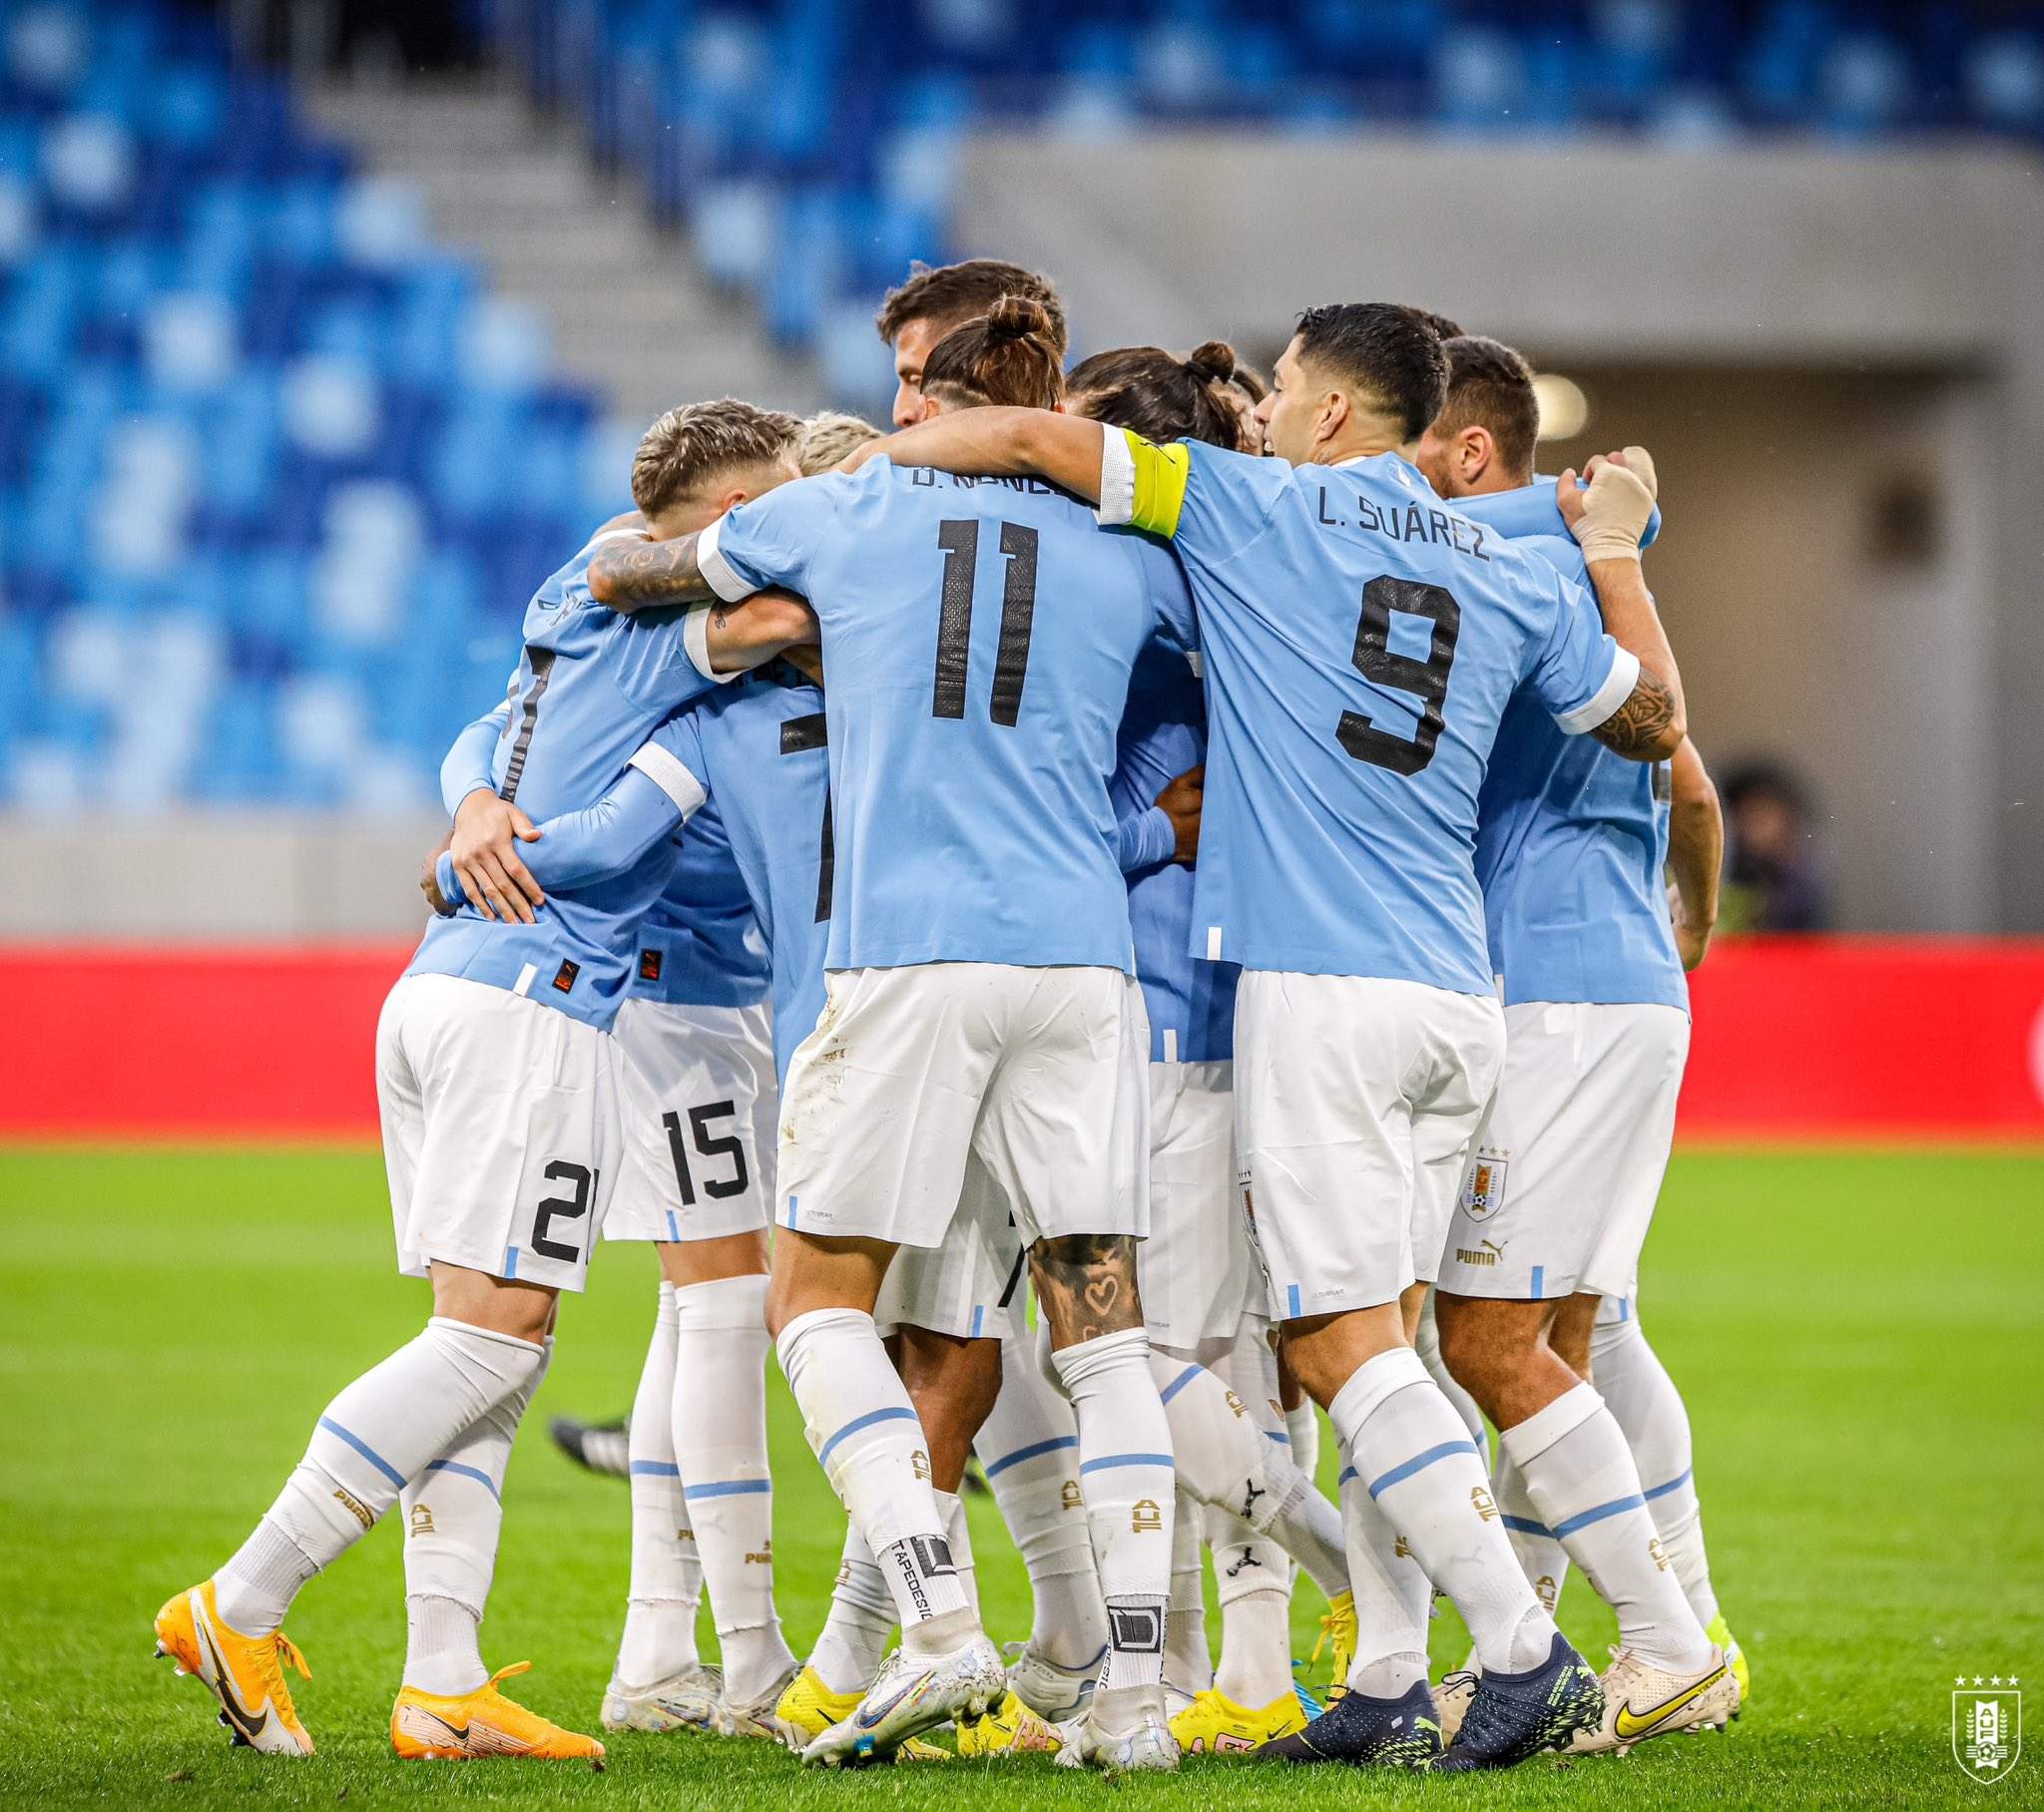 The offensive sector works and Uruguay wins the “cup duel” against Canada